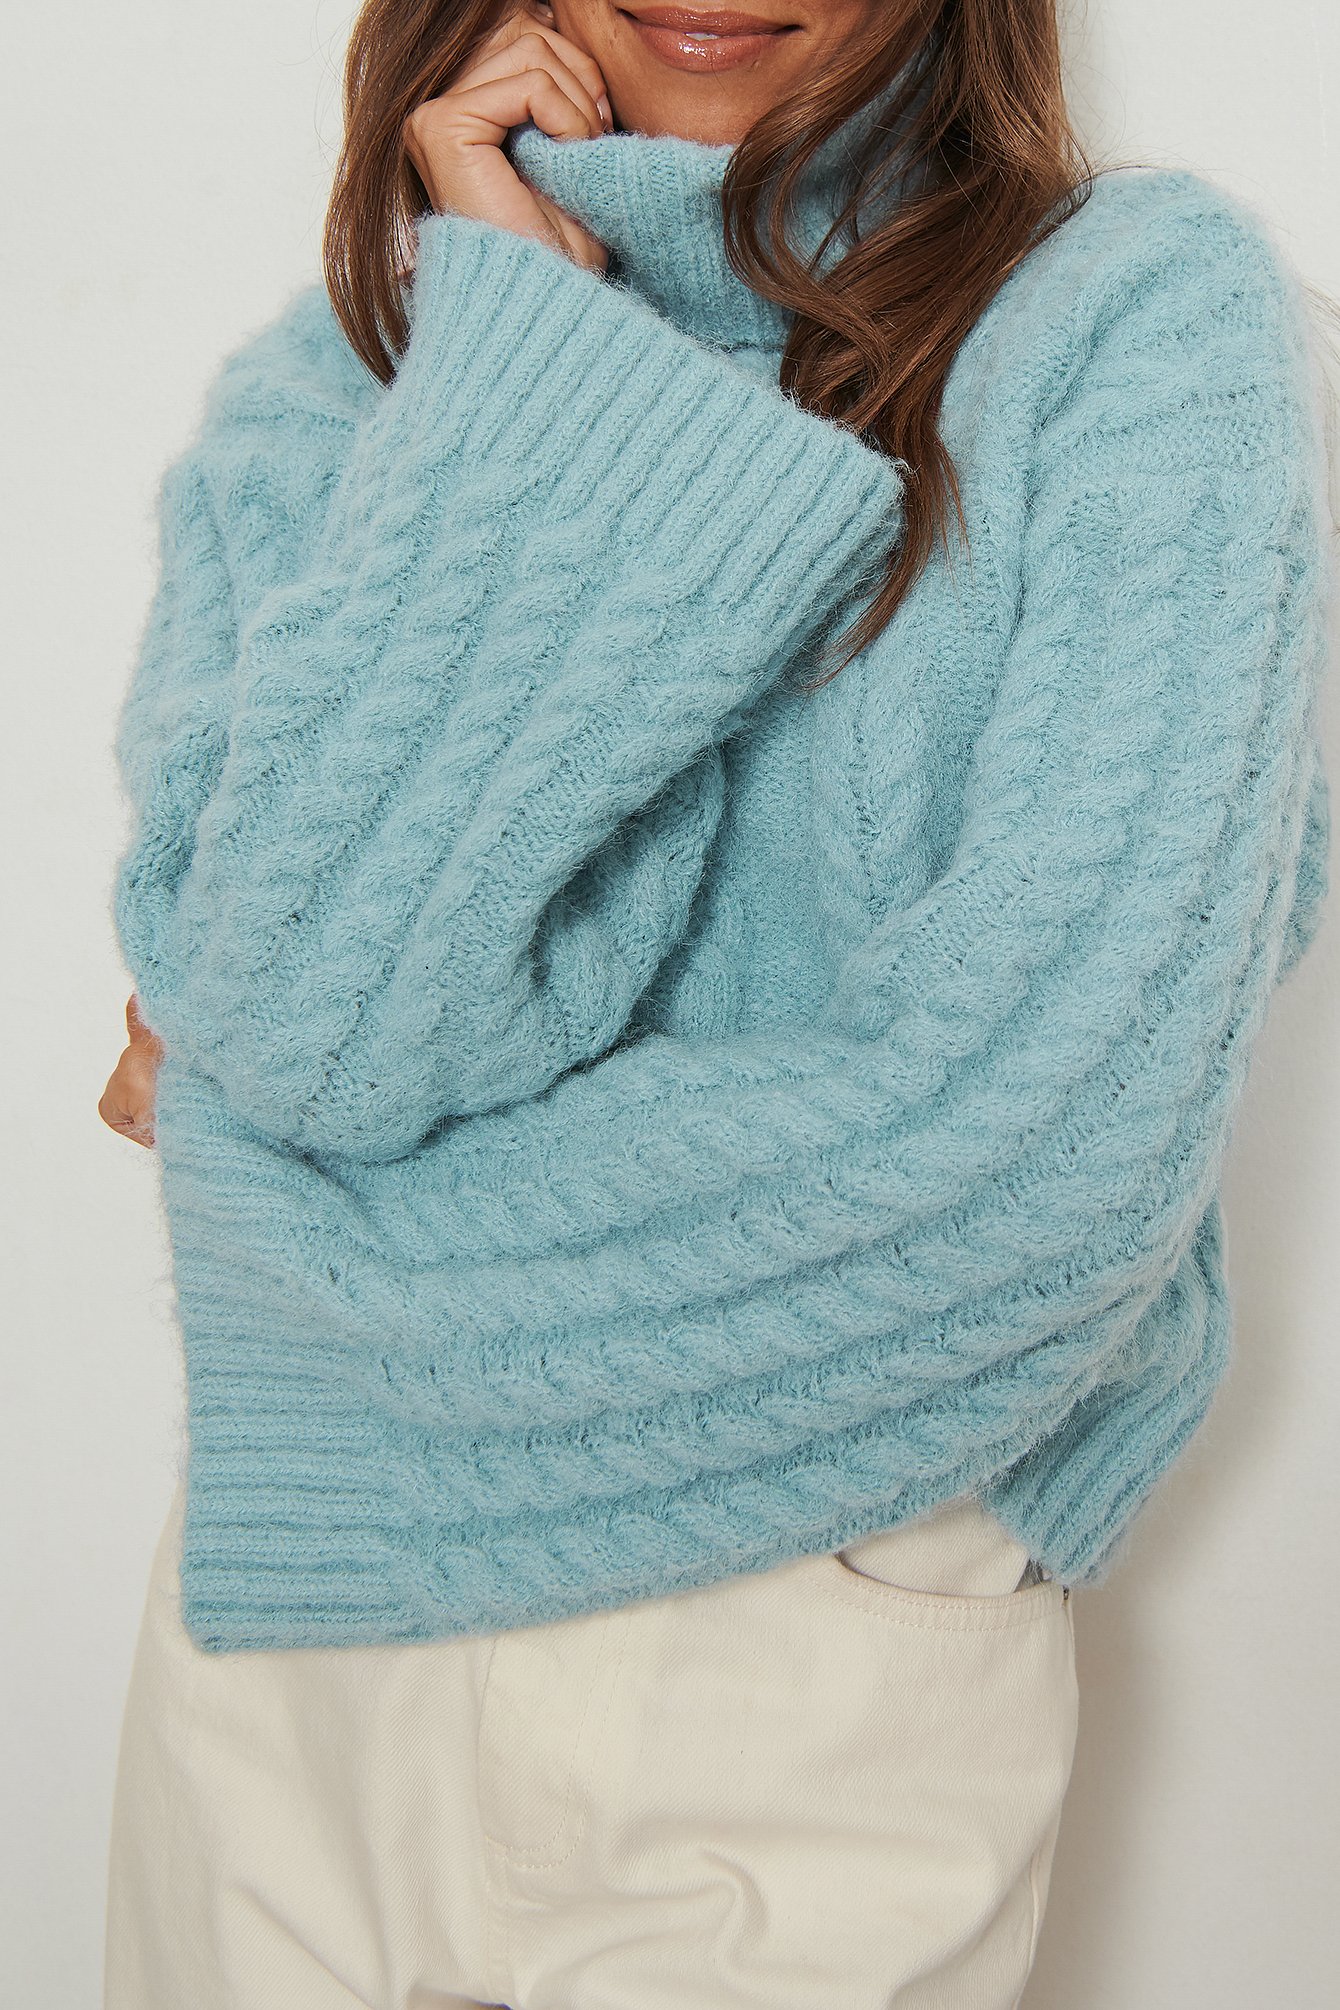 Dusty Blue Boxy Cable Knit High Neck Sweater